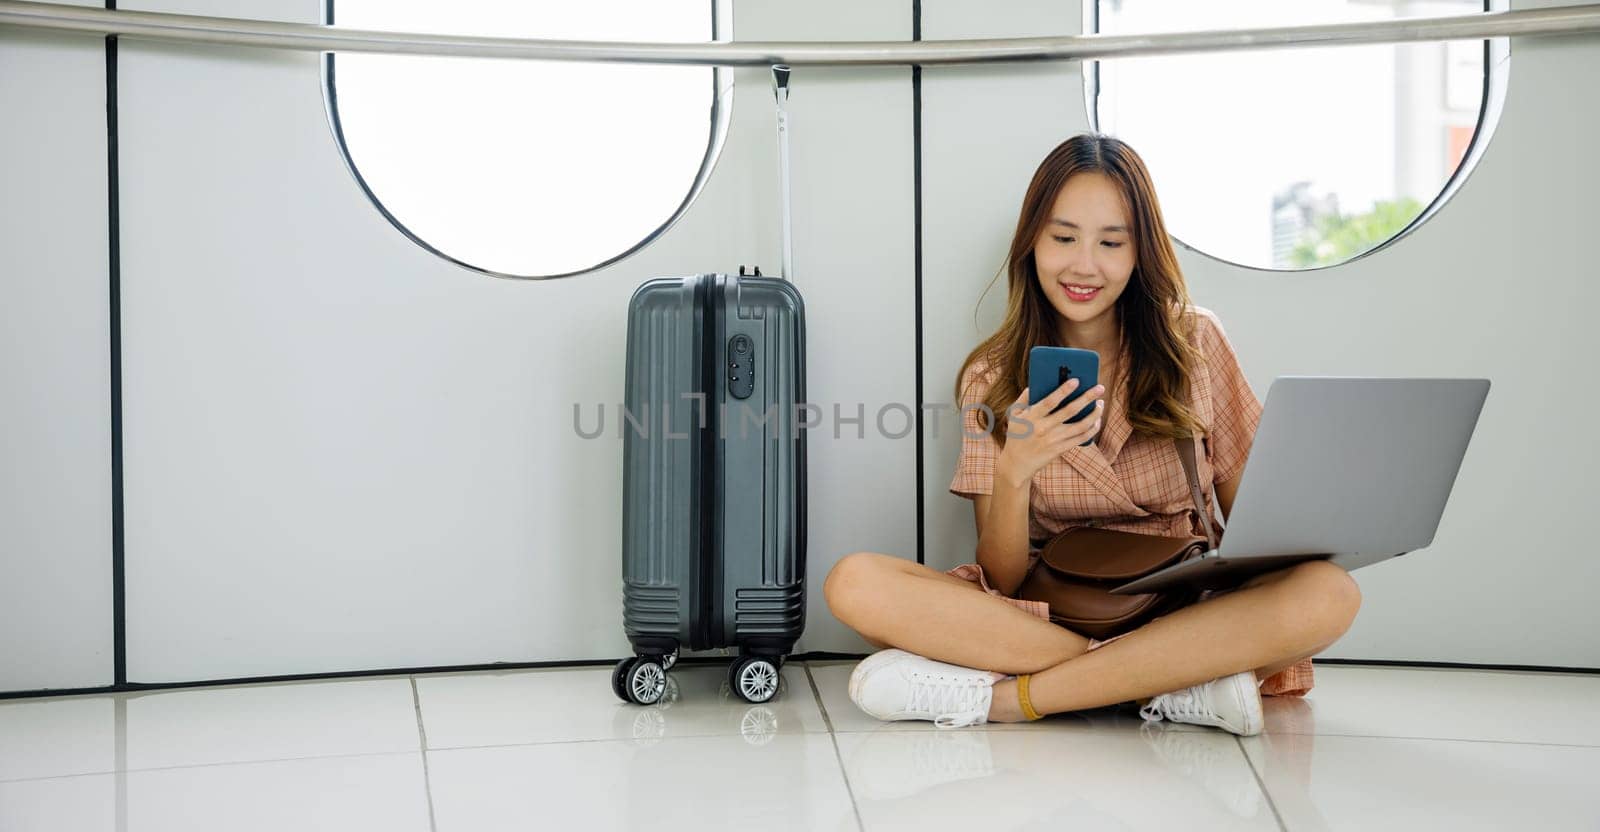 Happy woman texting on her mobile phone and waiting for her boarding gate to open at the airport terminal. Tourist journey trip concept